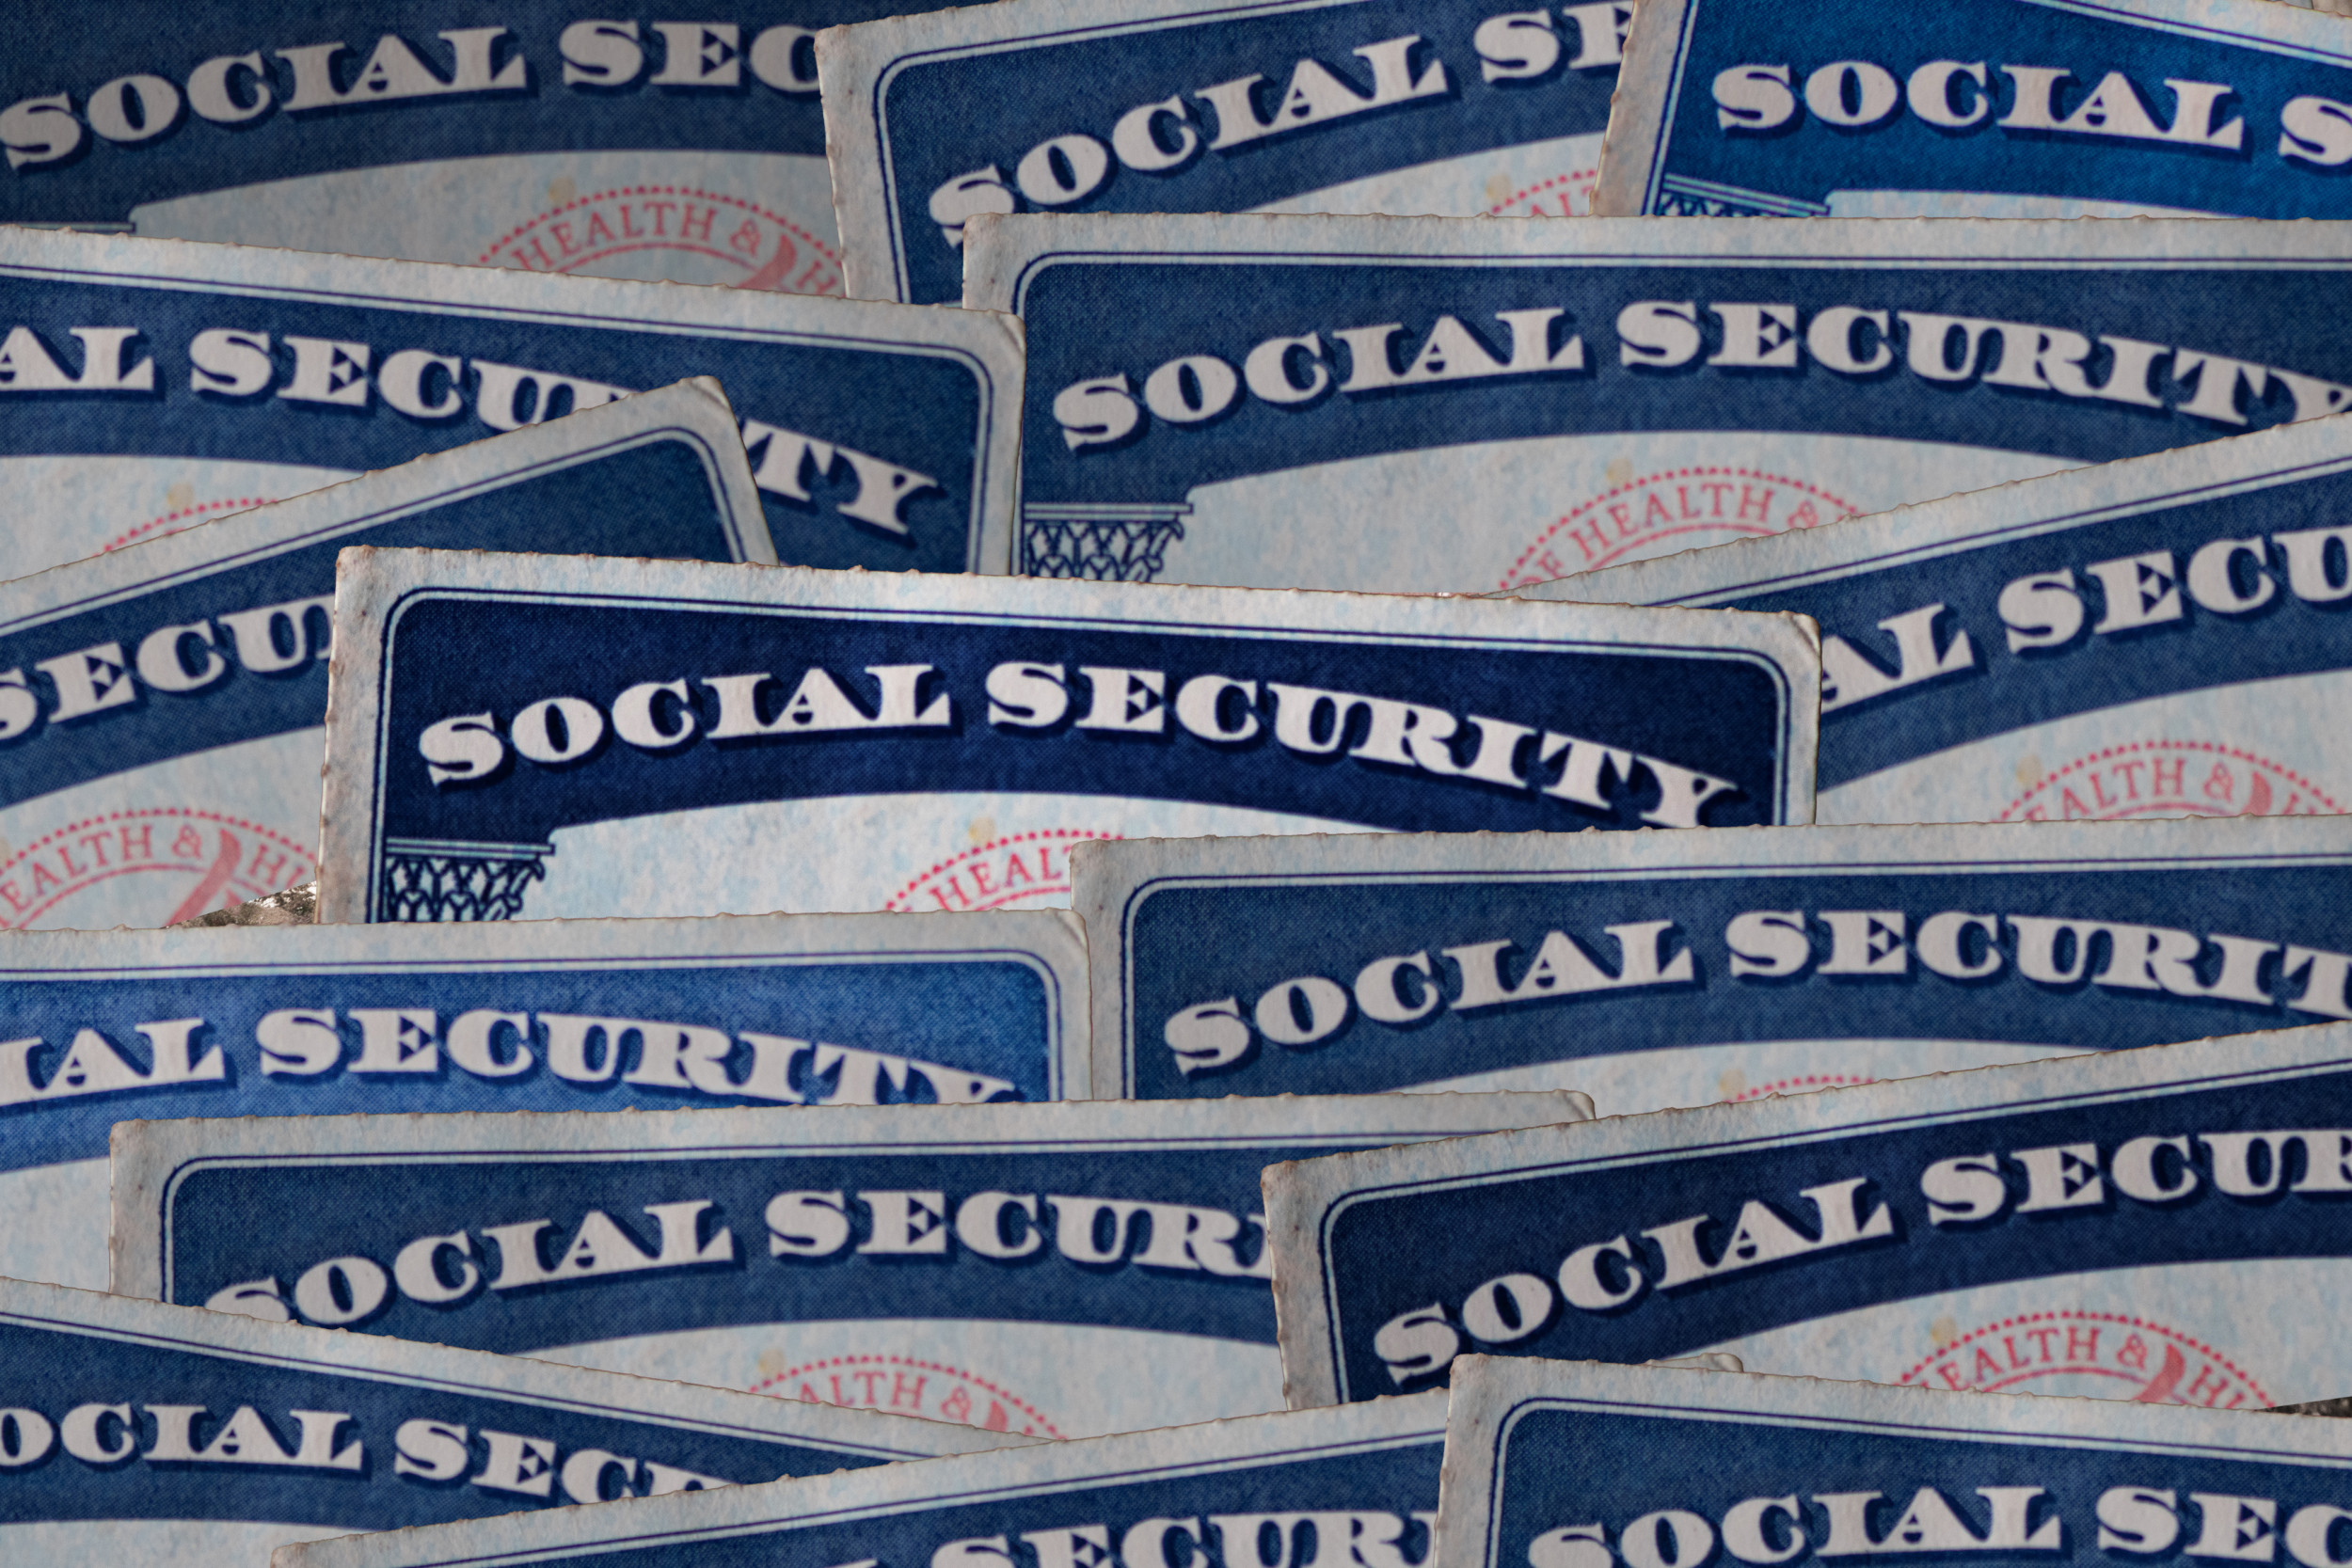 Social Security Cuts Backed for Some Americans - Coldfax Business News ...